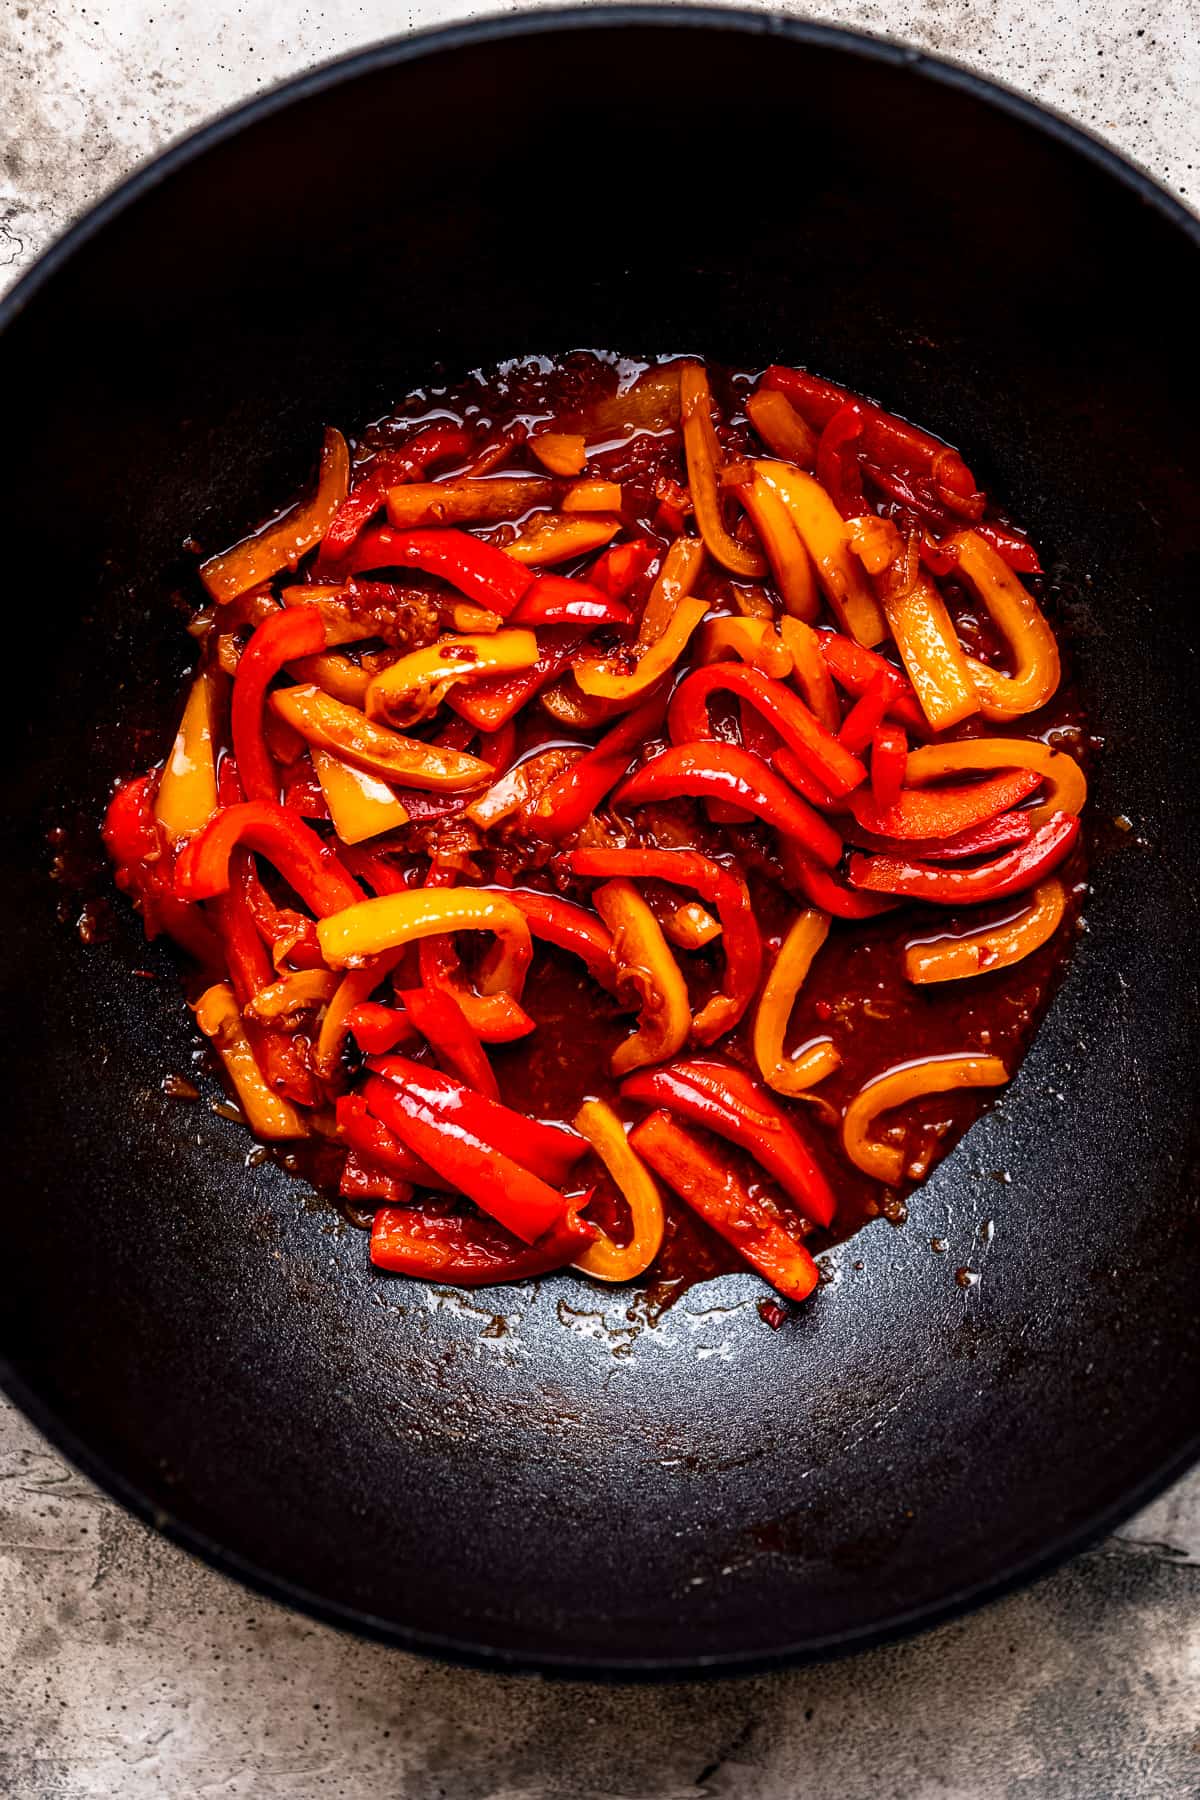 Peppers being sauted in a frying pan.